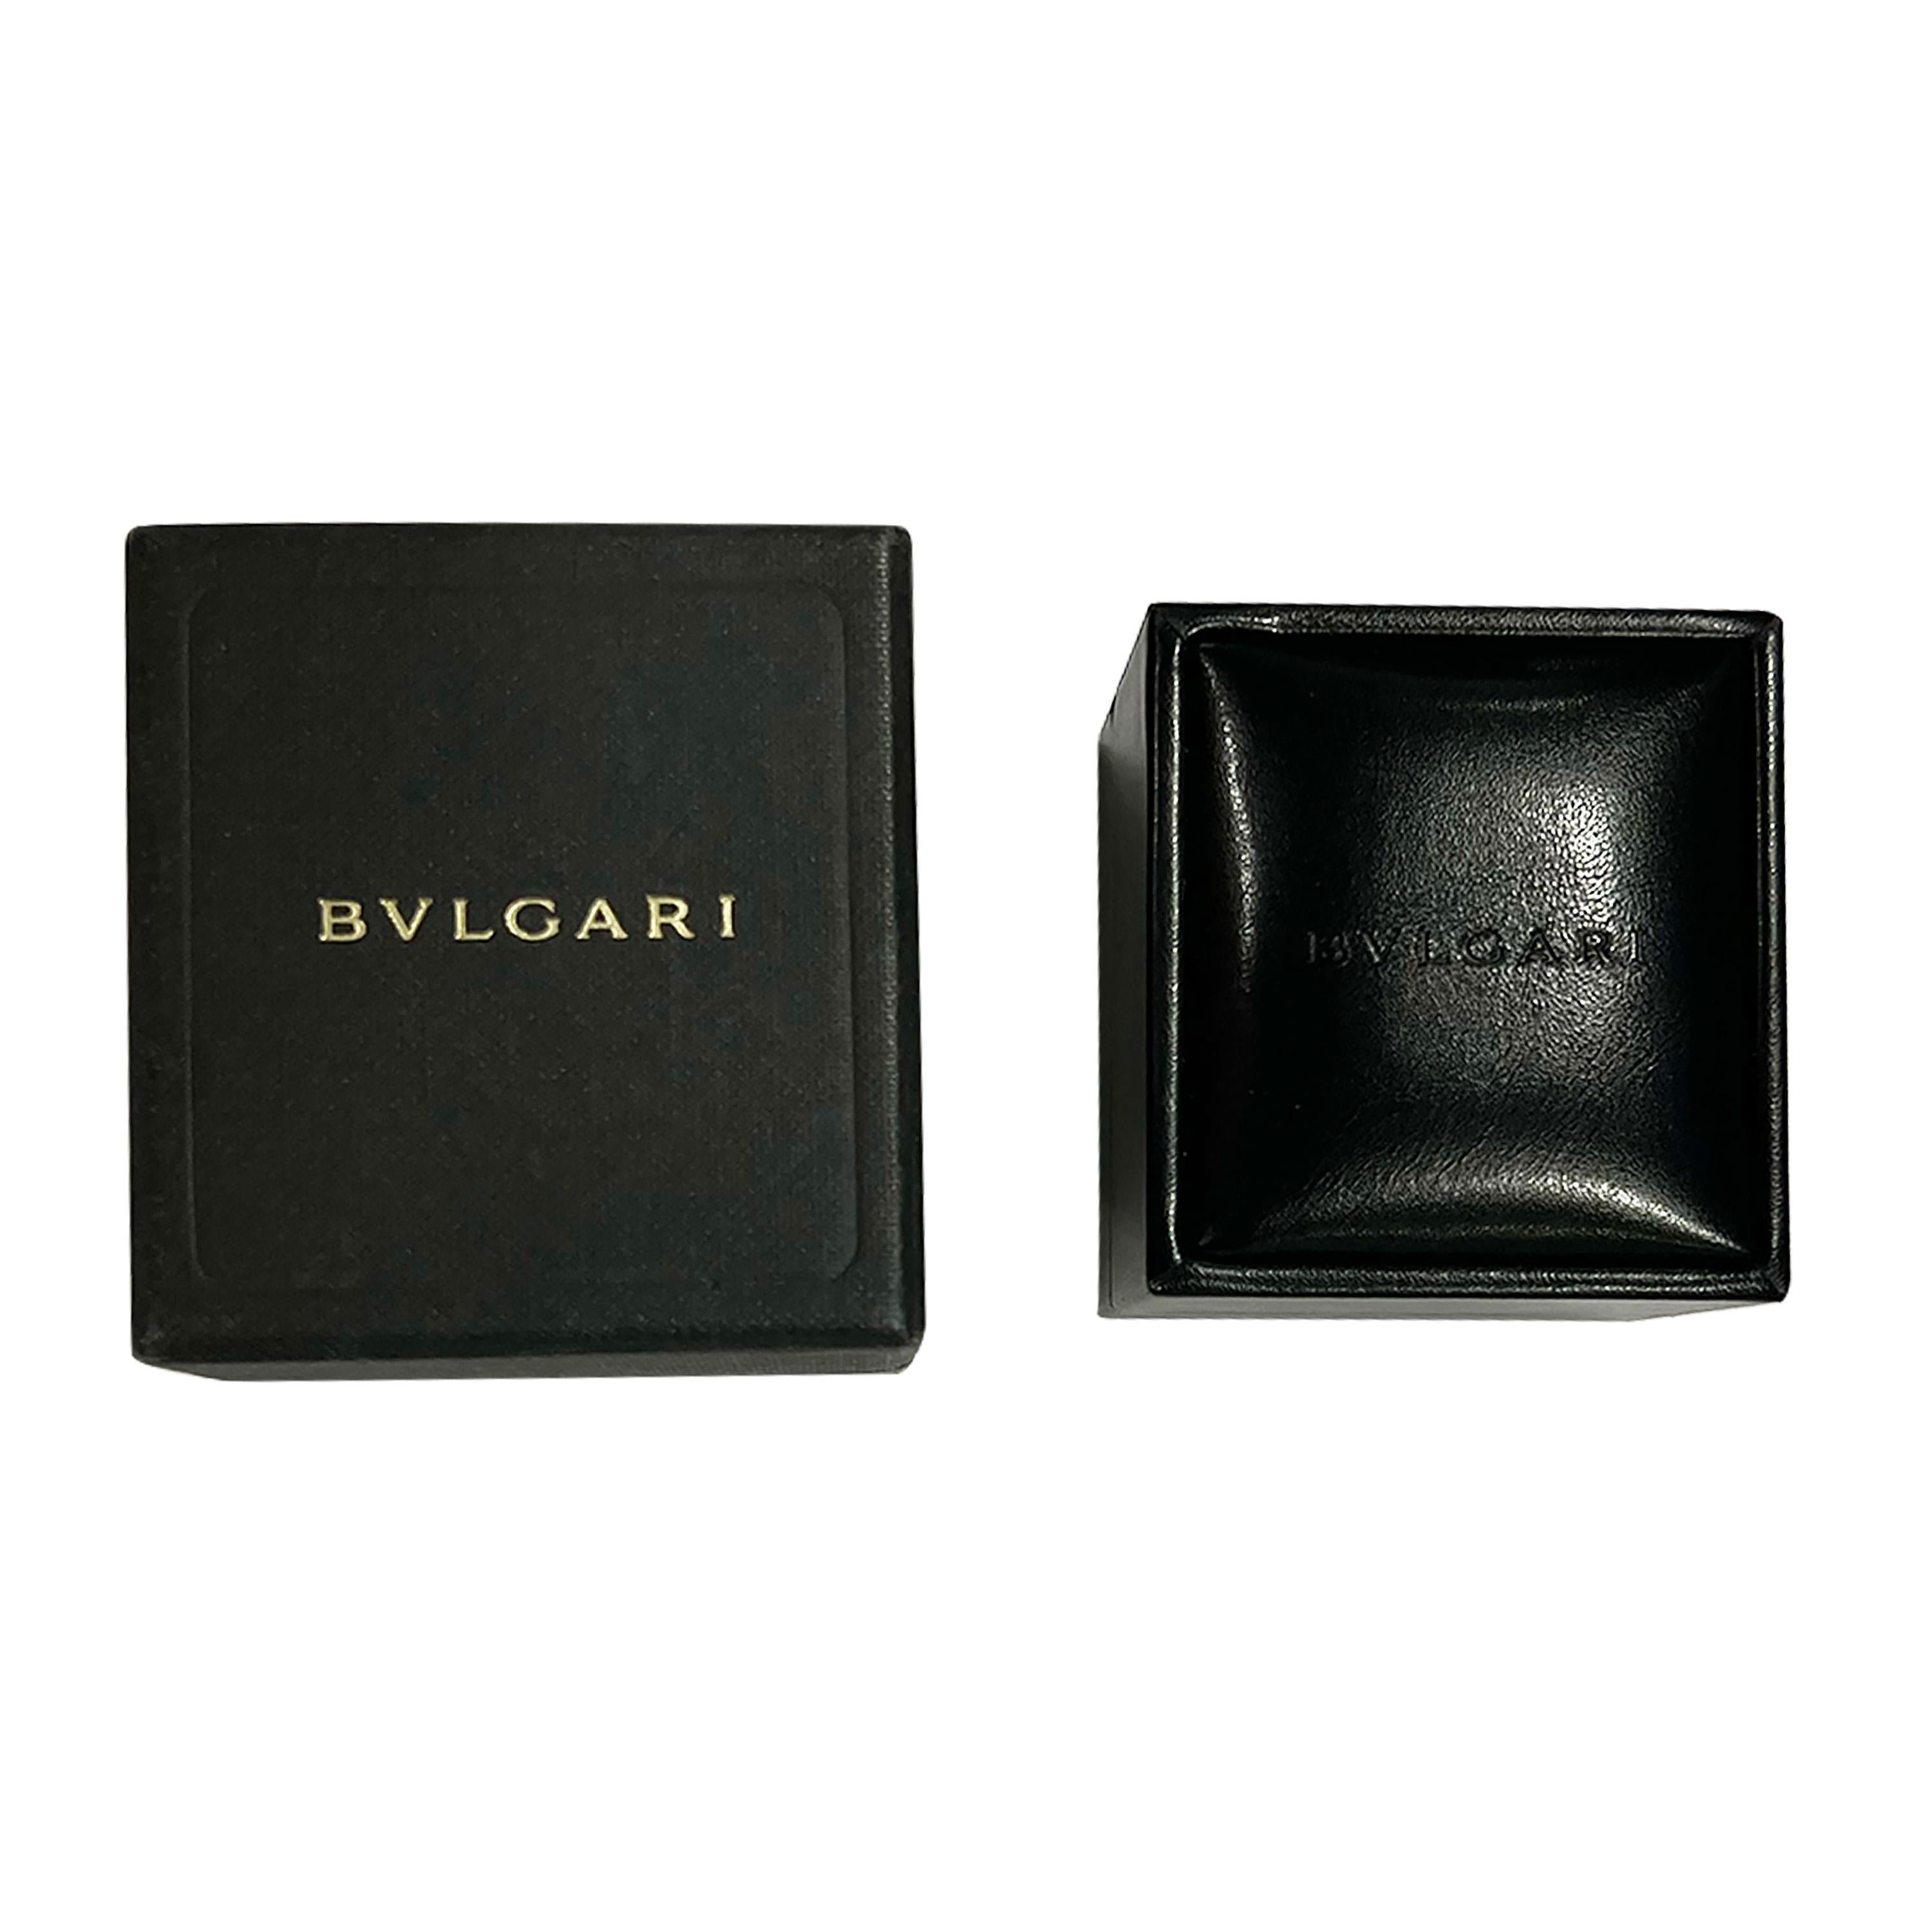 BVLGARI B.zero1 Diamond Ring in 18k White Gold 2.4 CTW In Excellent Condition For Sale In New York, NY